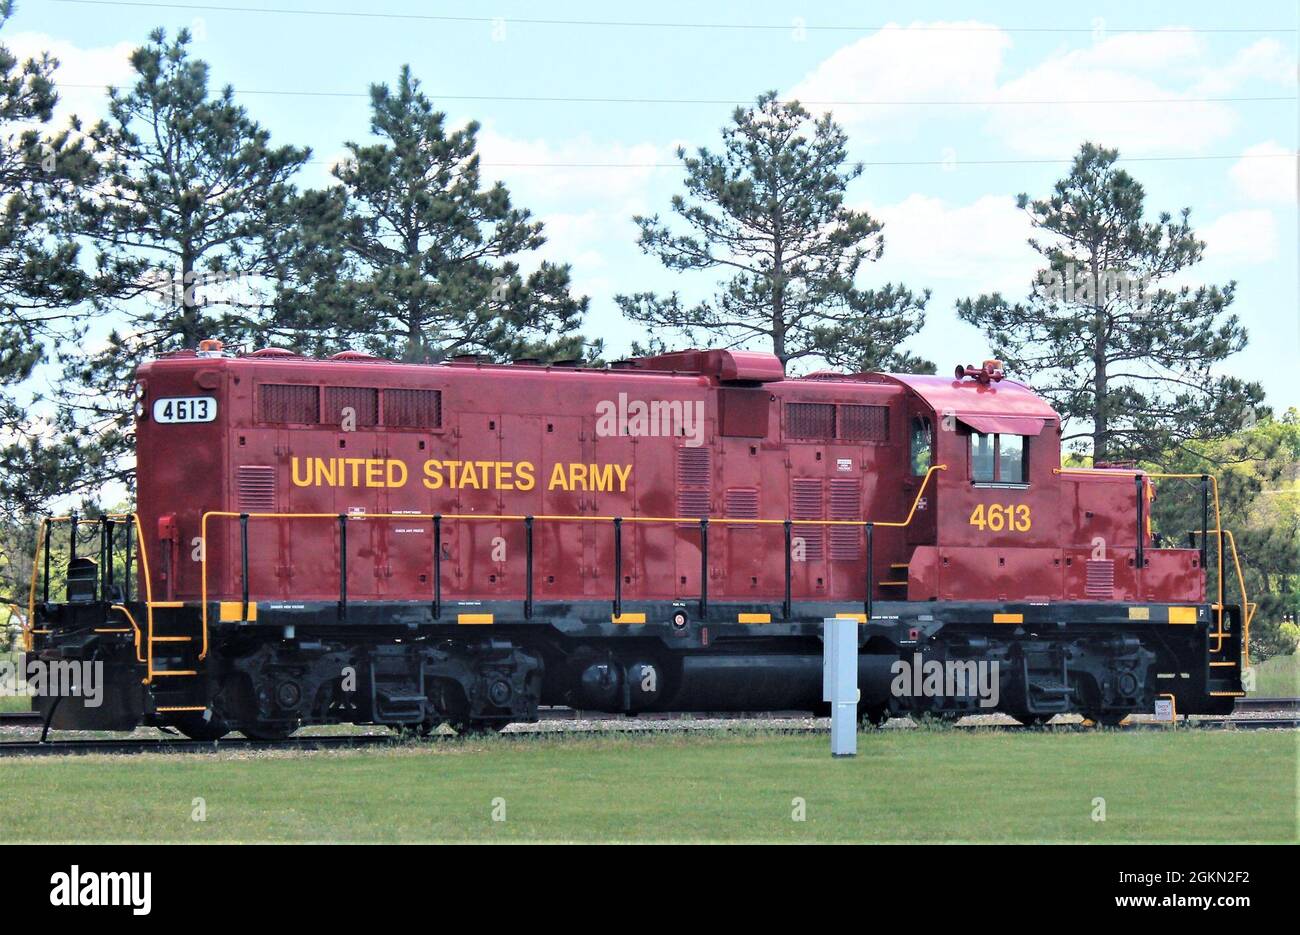 A U.S. Army locomotive used as part of rail operations is shown June 2, 2021, at Fort McCoy, Wis. For the many decades of Fort McCoy’s existence, the capability to transport cargo and equipment to and from the installation by rail has always been there. During World War II, for example, the railroad at Fort McCoy was one of the main forms of transportation for bringing troops in for training and home after the war as well as moving cargo and equipment in and out of the installation. And as rail operations continue in the future at the installation, Fort McCoy's Transportation Officer D.J. Eckl Stock Photo